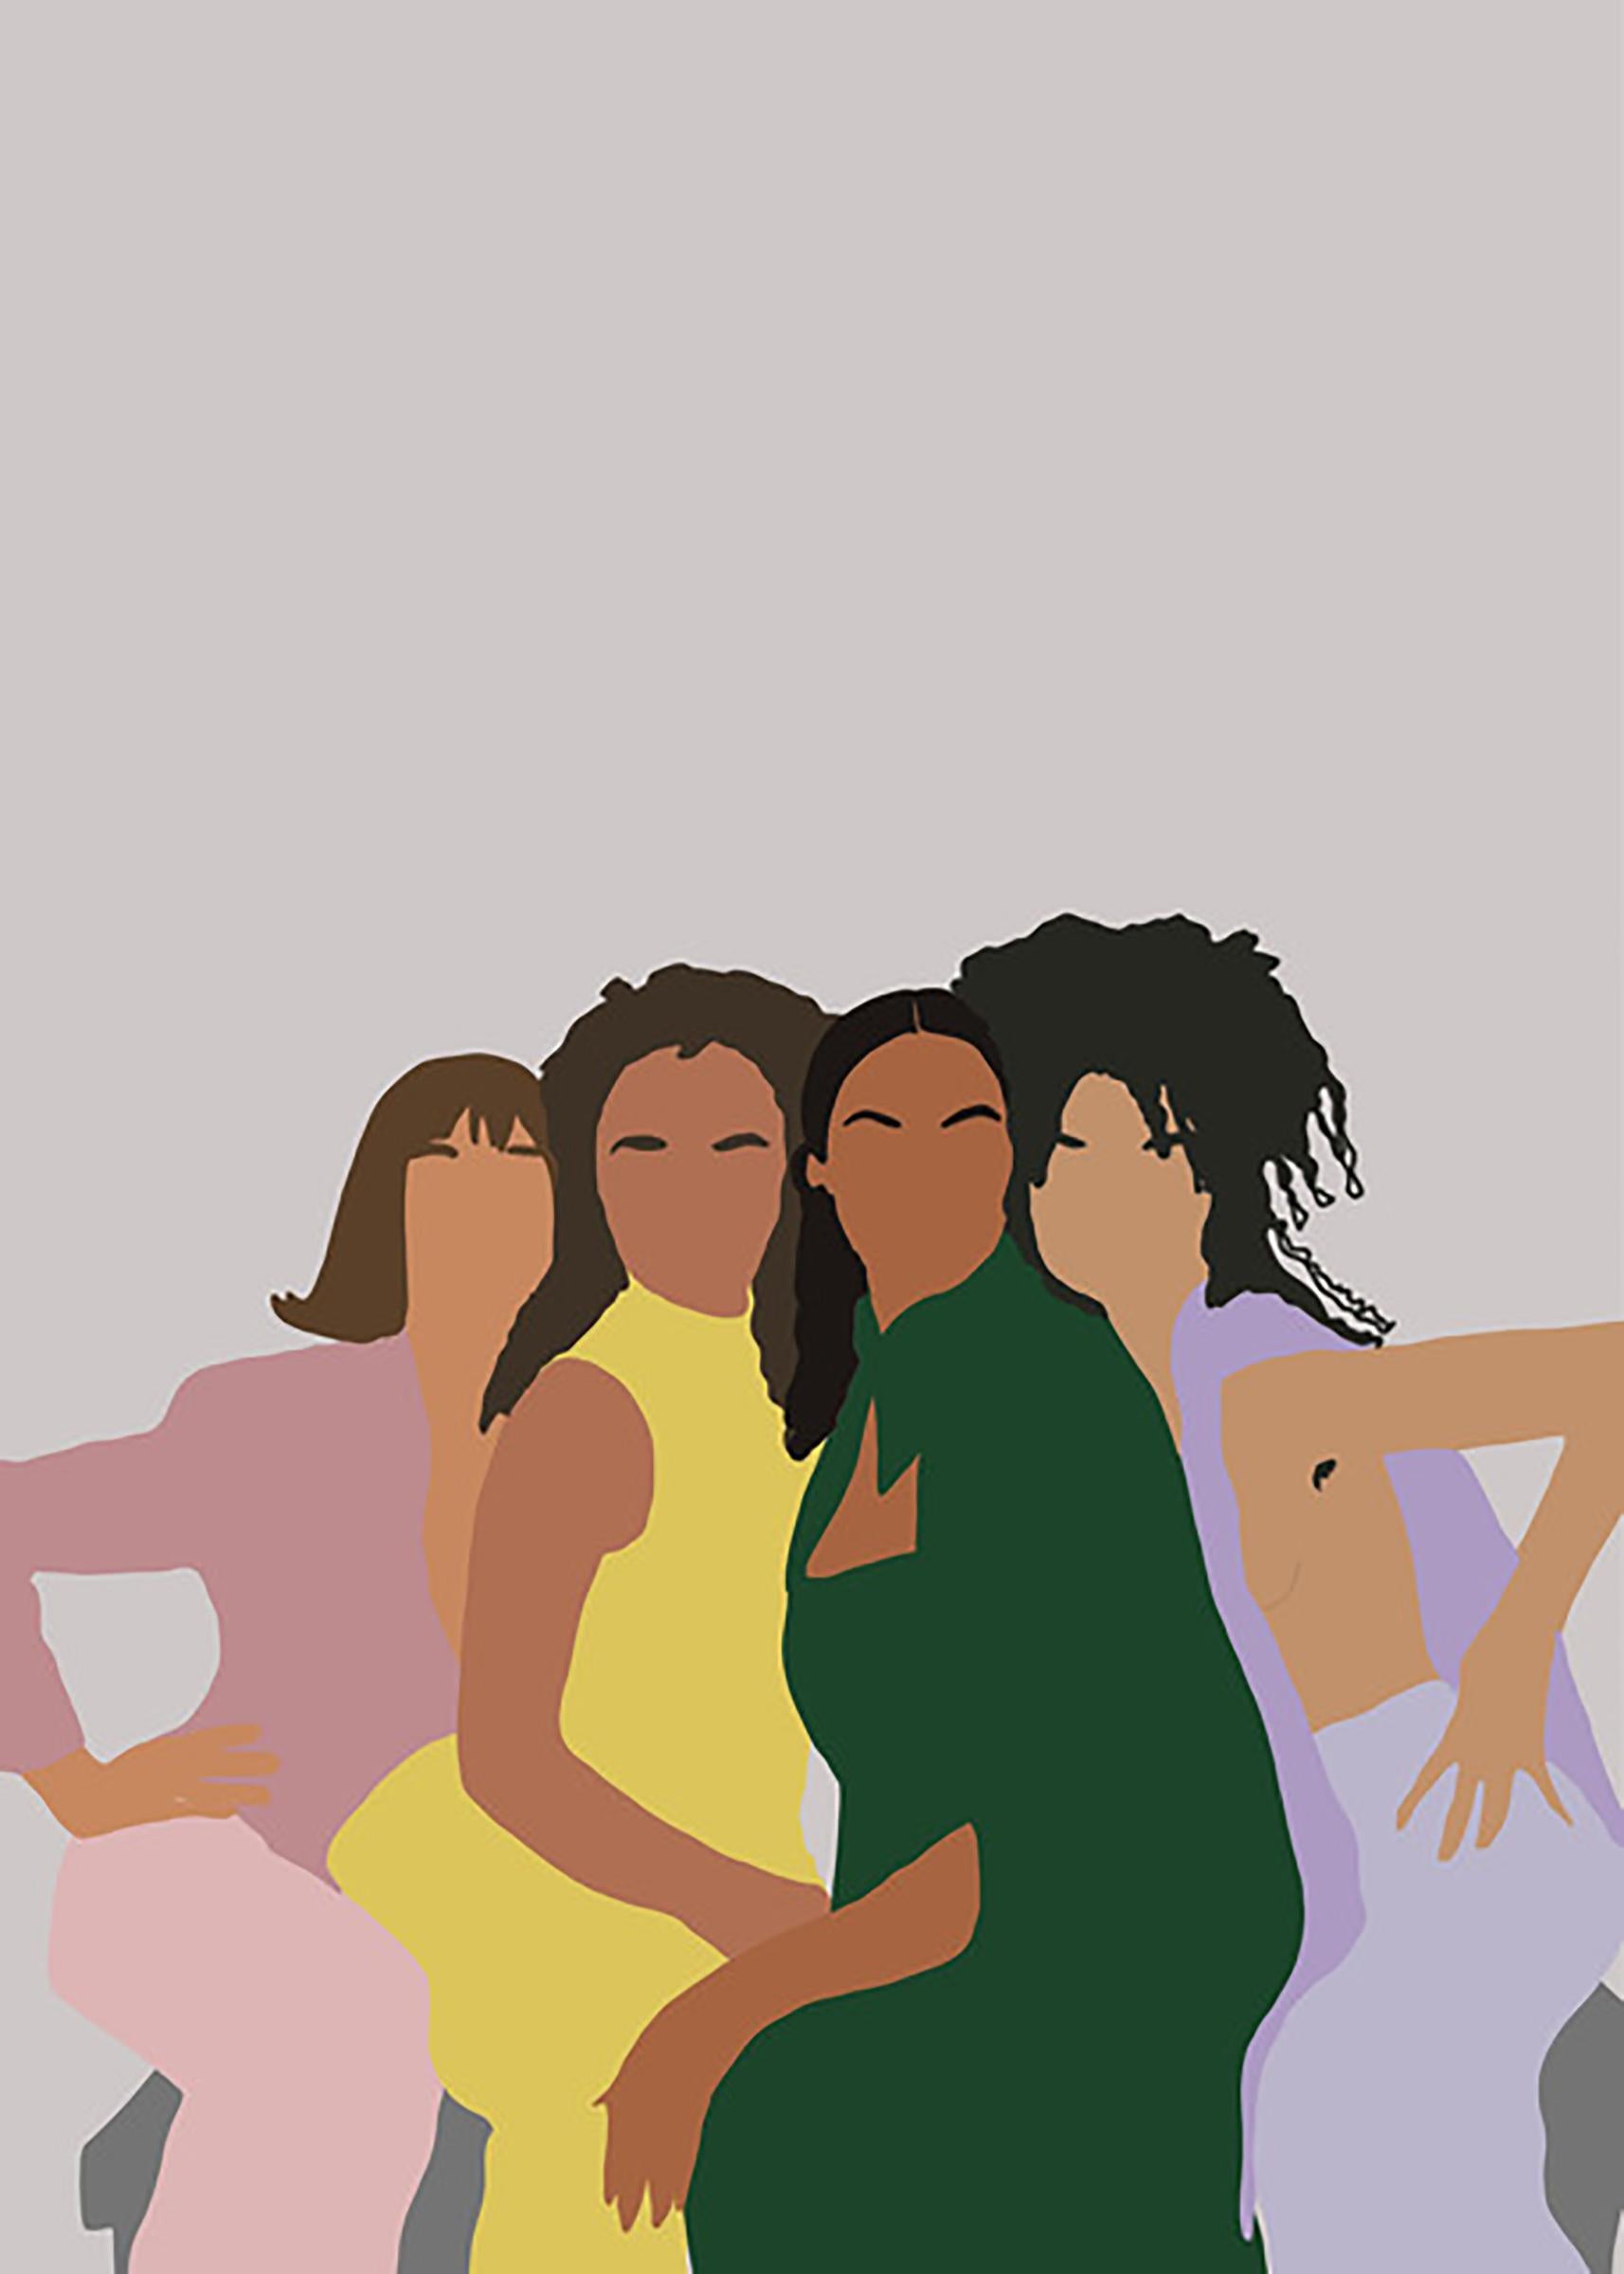 Samantha Viotty Portrait Print - Together- Digital Illustration of Four Women Multicultural Green+Yellow+Pink 